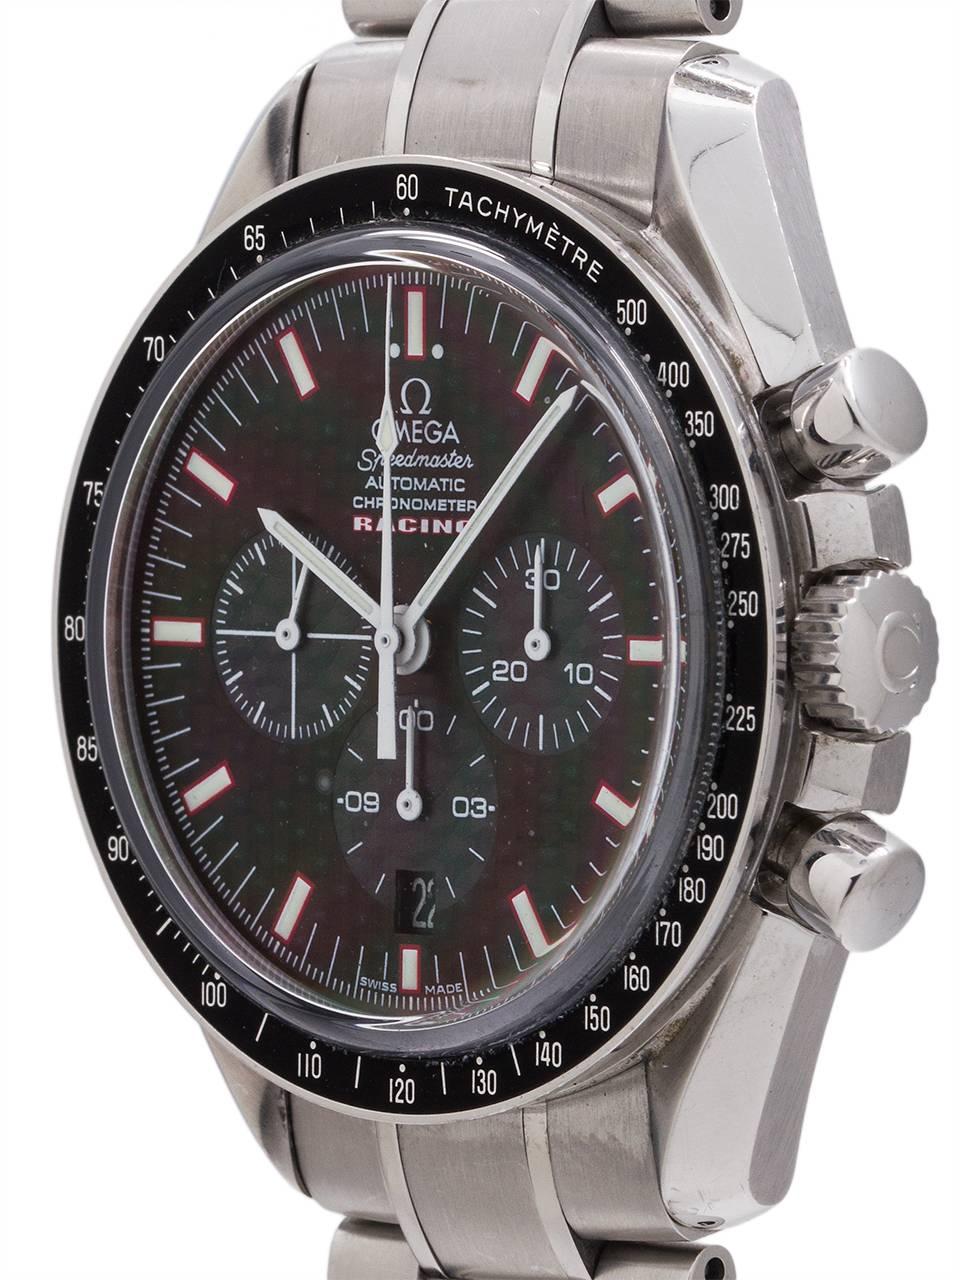 
Omega stainless steel Speedmaster Racing ref. 355.25900, case serial number 78.1 million circa 2006. Featuring 39.5 x 45mm case with pressure fitted case back, round pushers, stainless steel tachometer bezel and sapphire crystal. Featuring a black